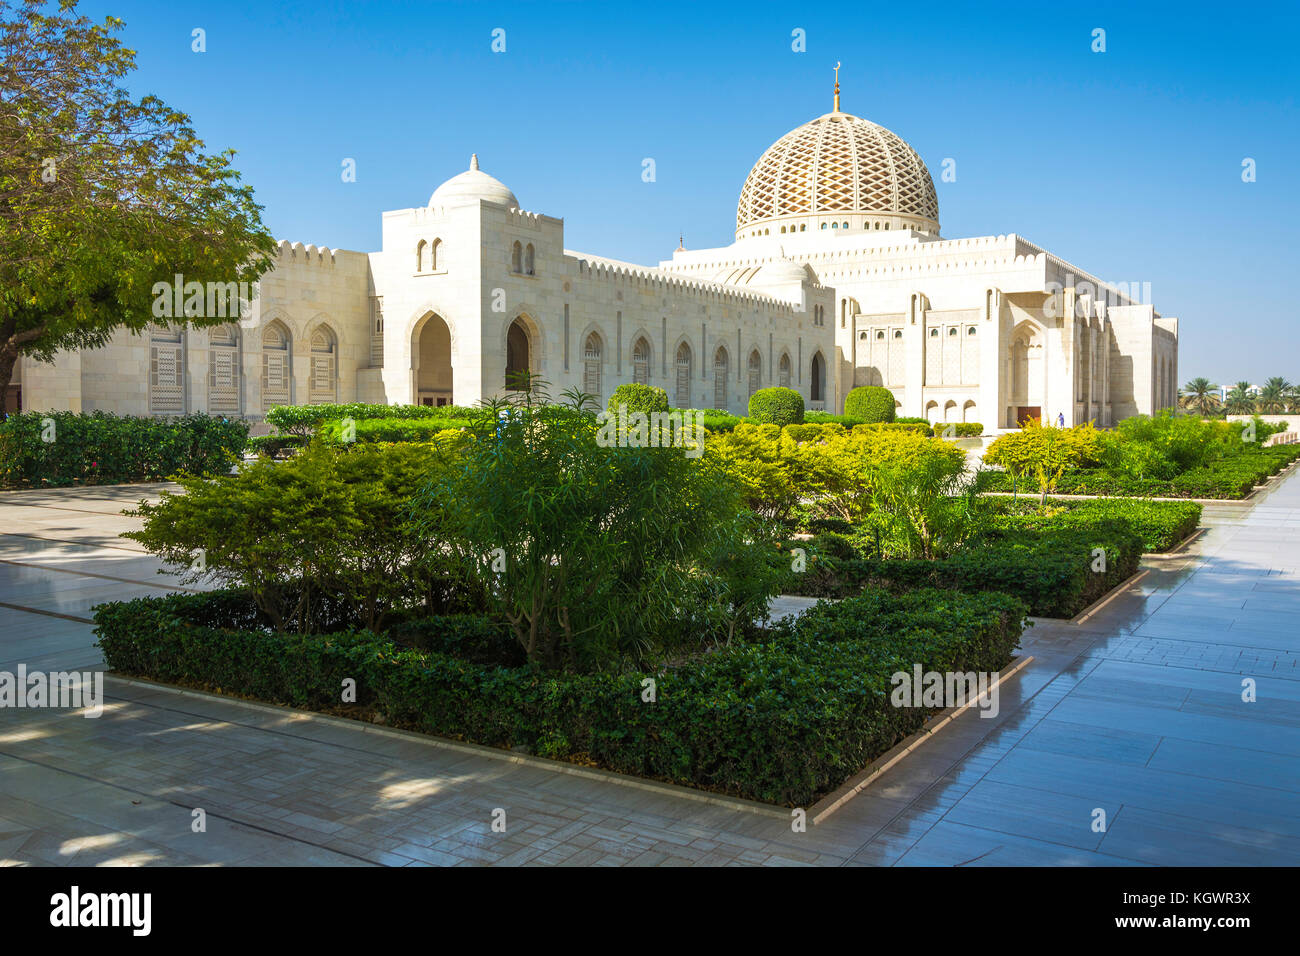 Sultan Qaboos Grand Mosque located in the Omani capital of Muscat is the main mosque in the Sultanate of Oman. Stock Photo